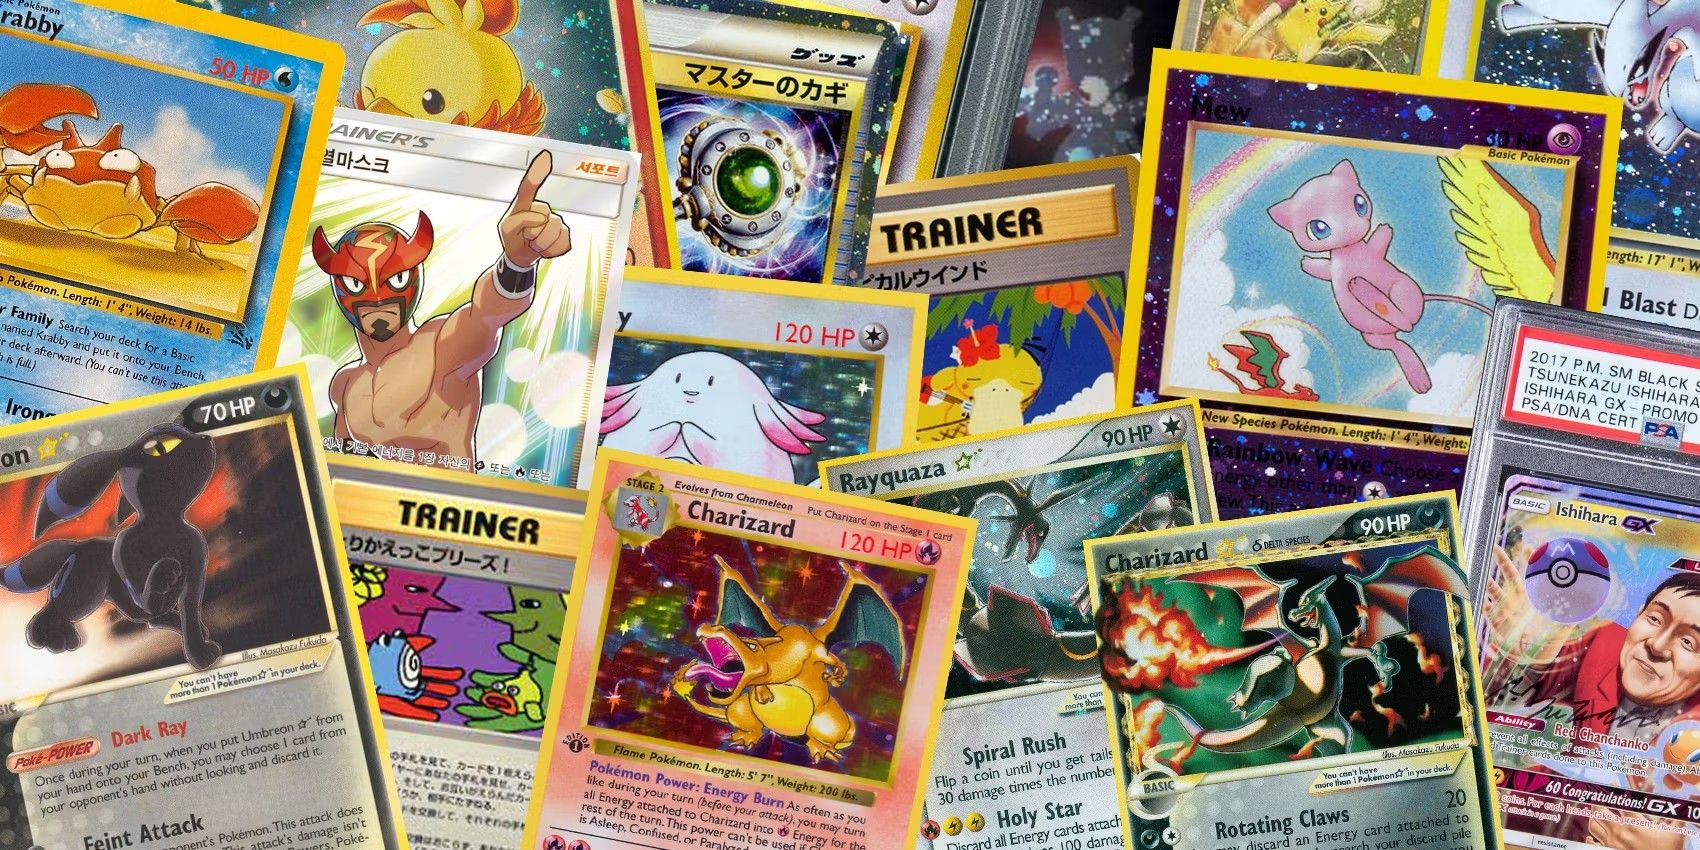 Some of the rarest Pokemon cards